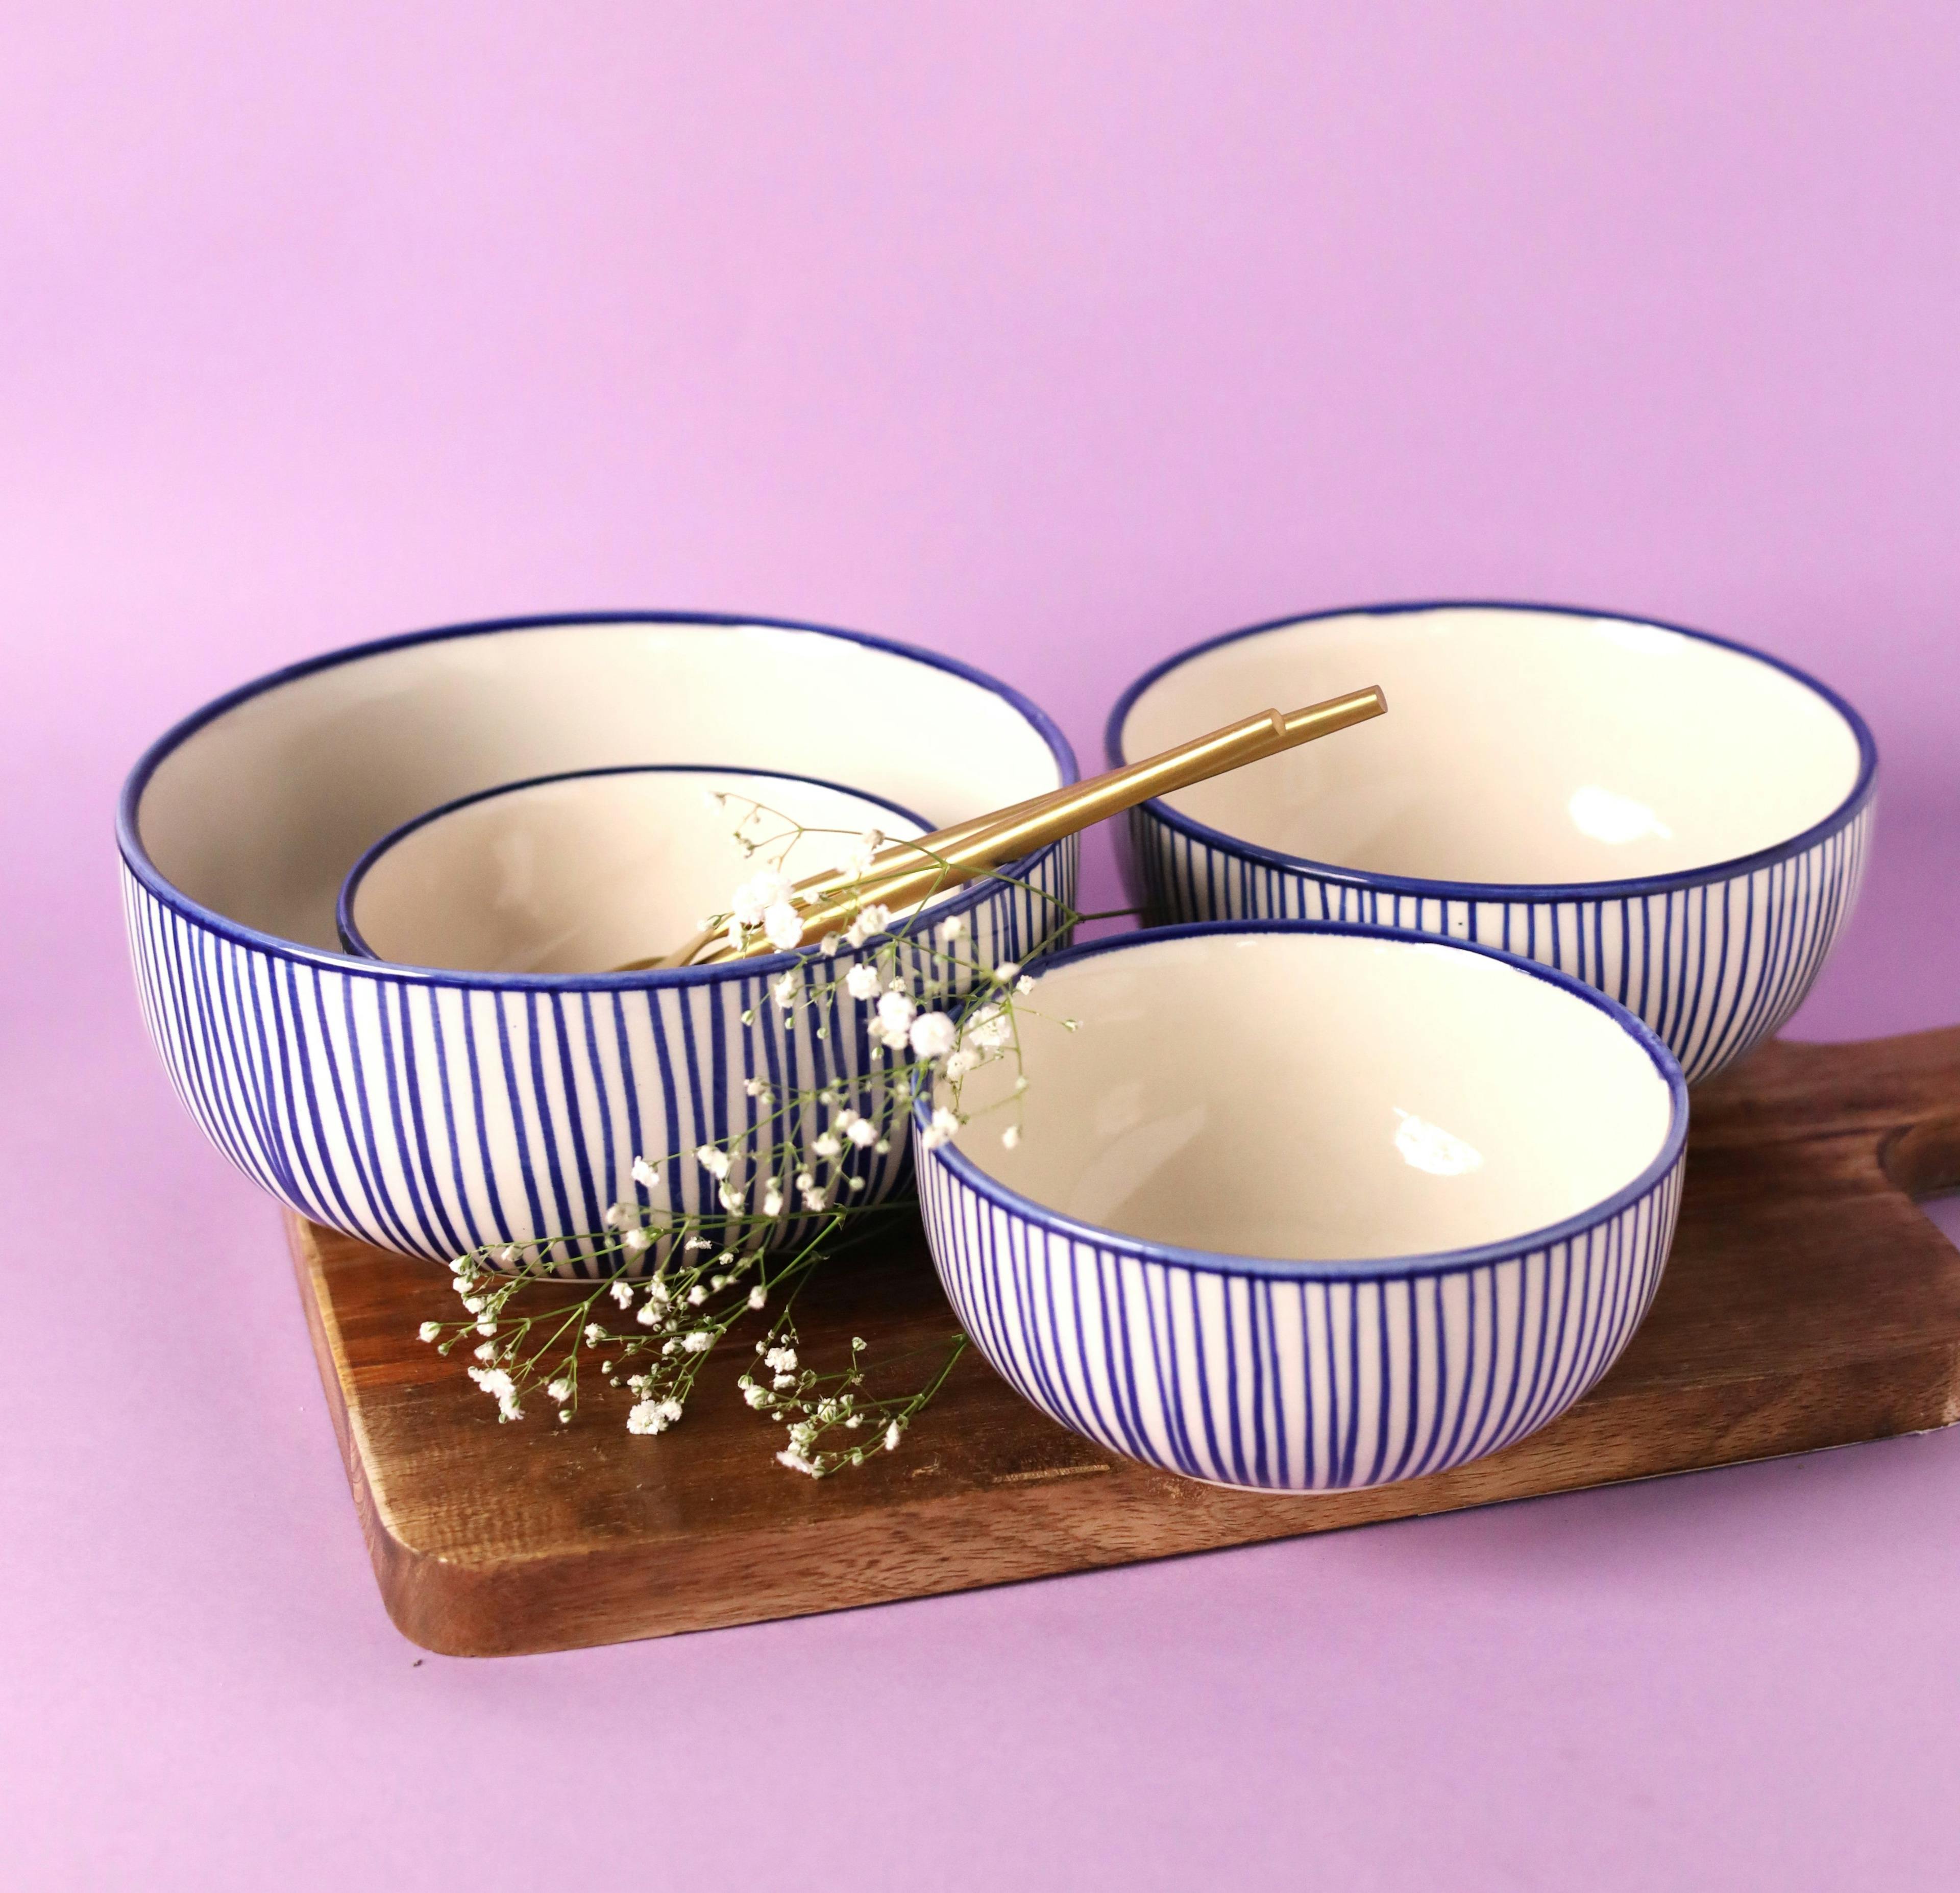 Additional image of Mykonos Nesting Bowl Set of 4, a product by Olive Home accent